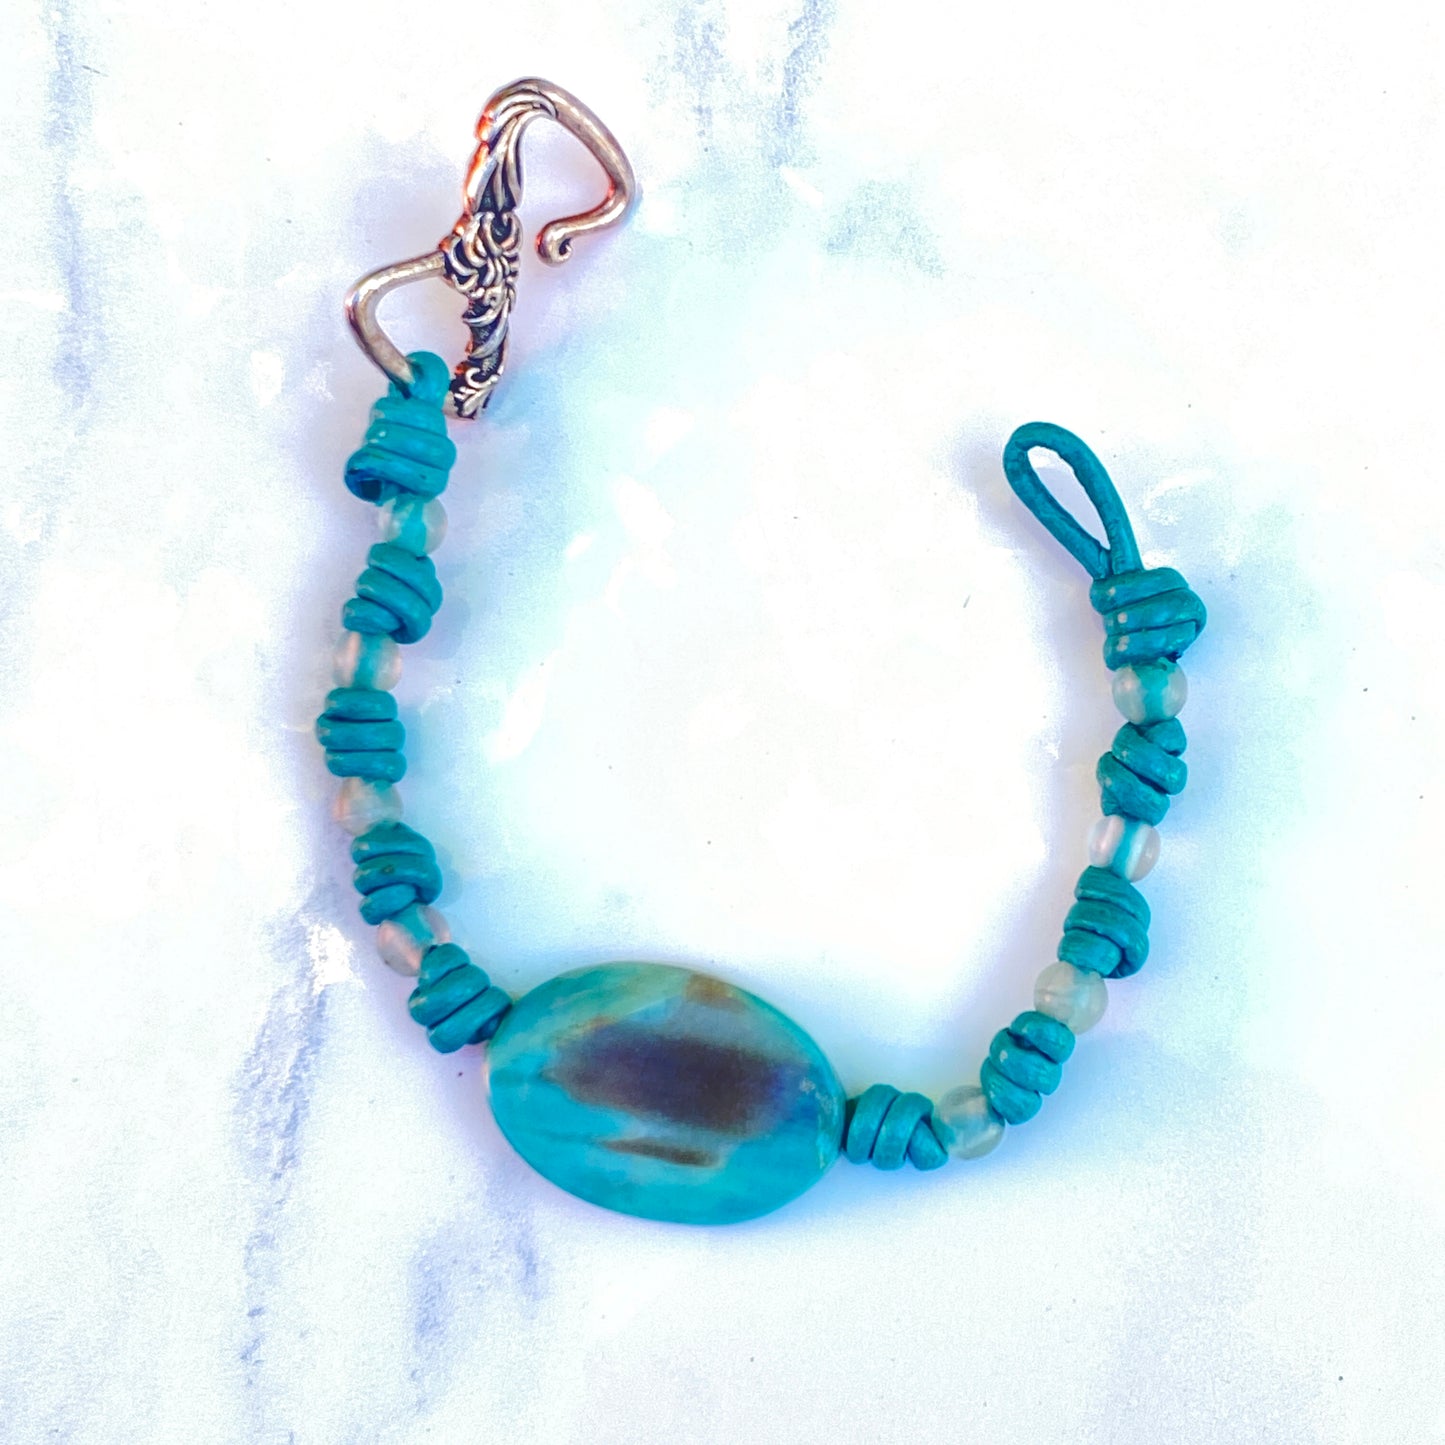 Agate and Fluorite gemstones on hand knotted Leather Bracelet